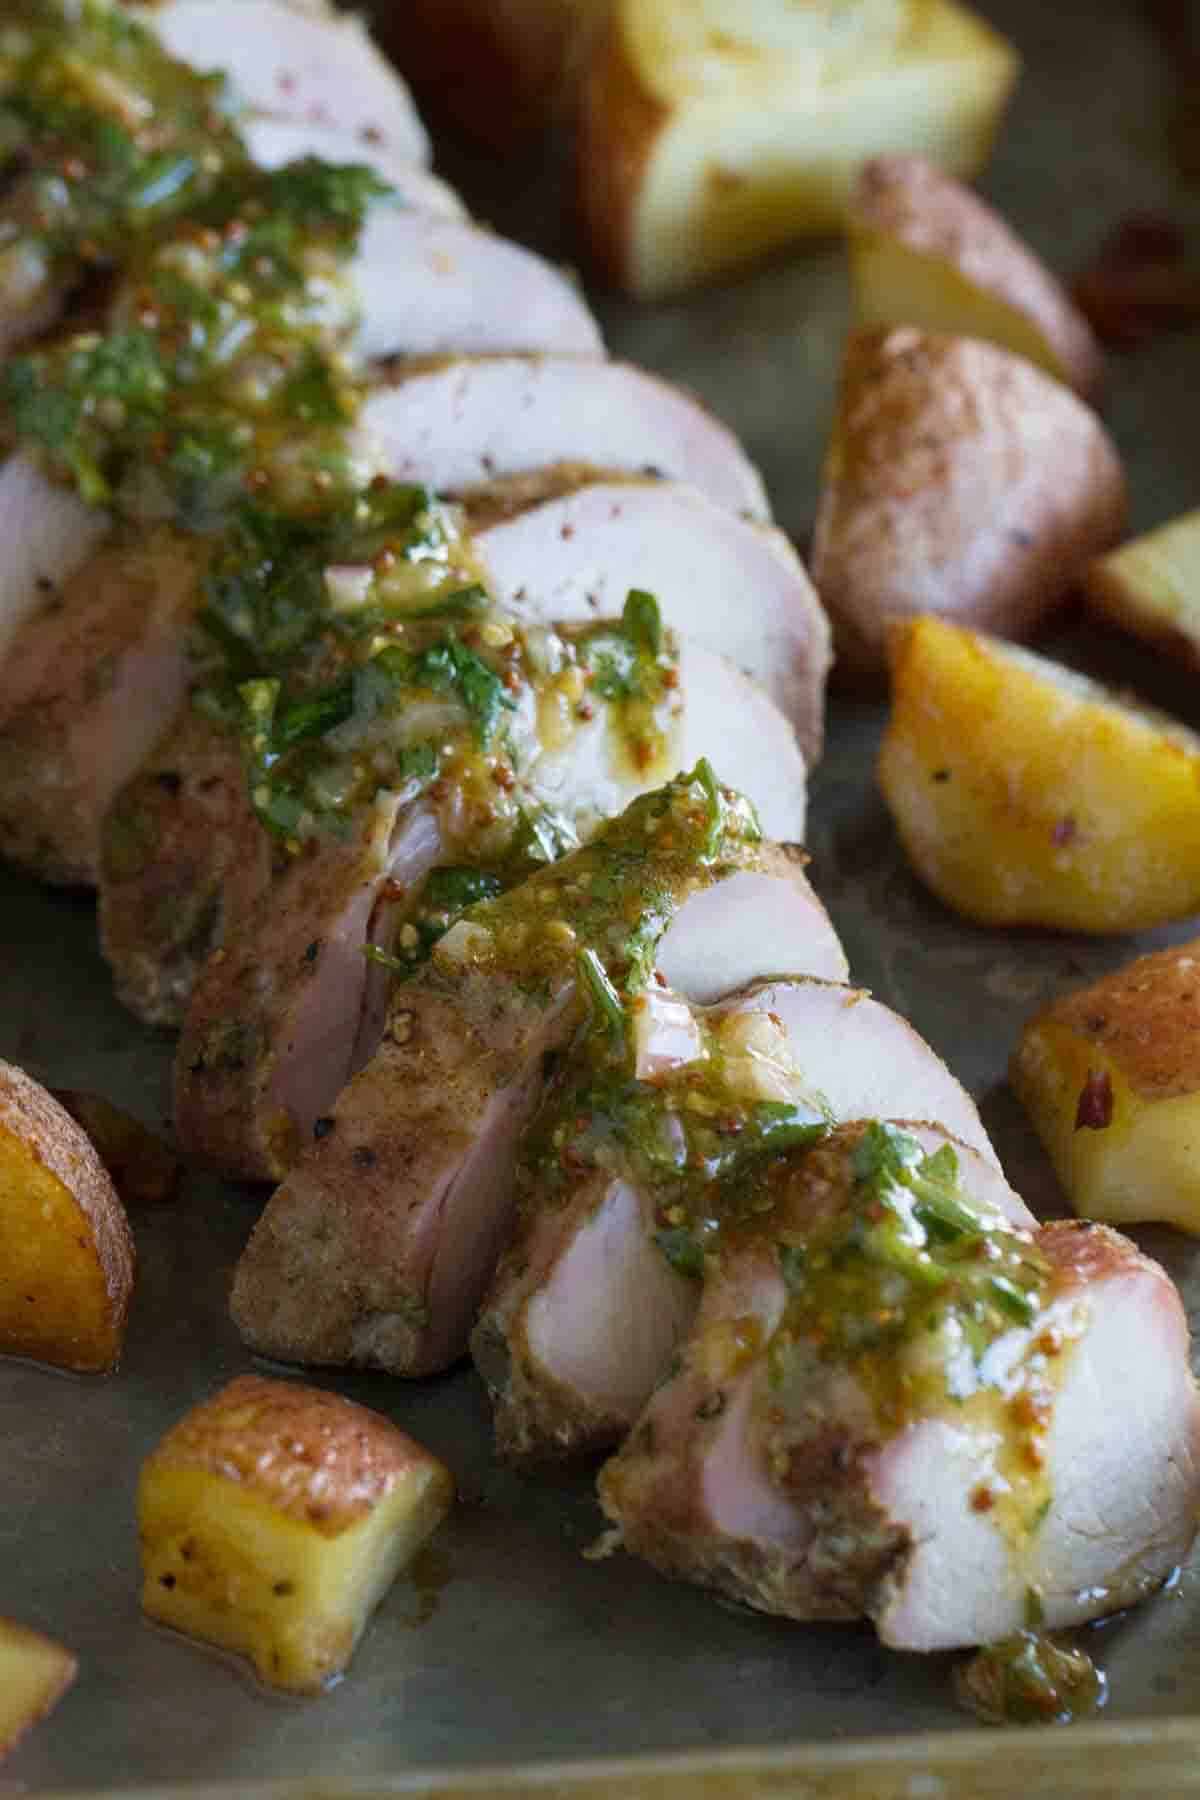 Sliced roasted pork tenderloin topped with mustard sauce and served with potatoes.